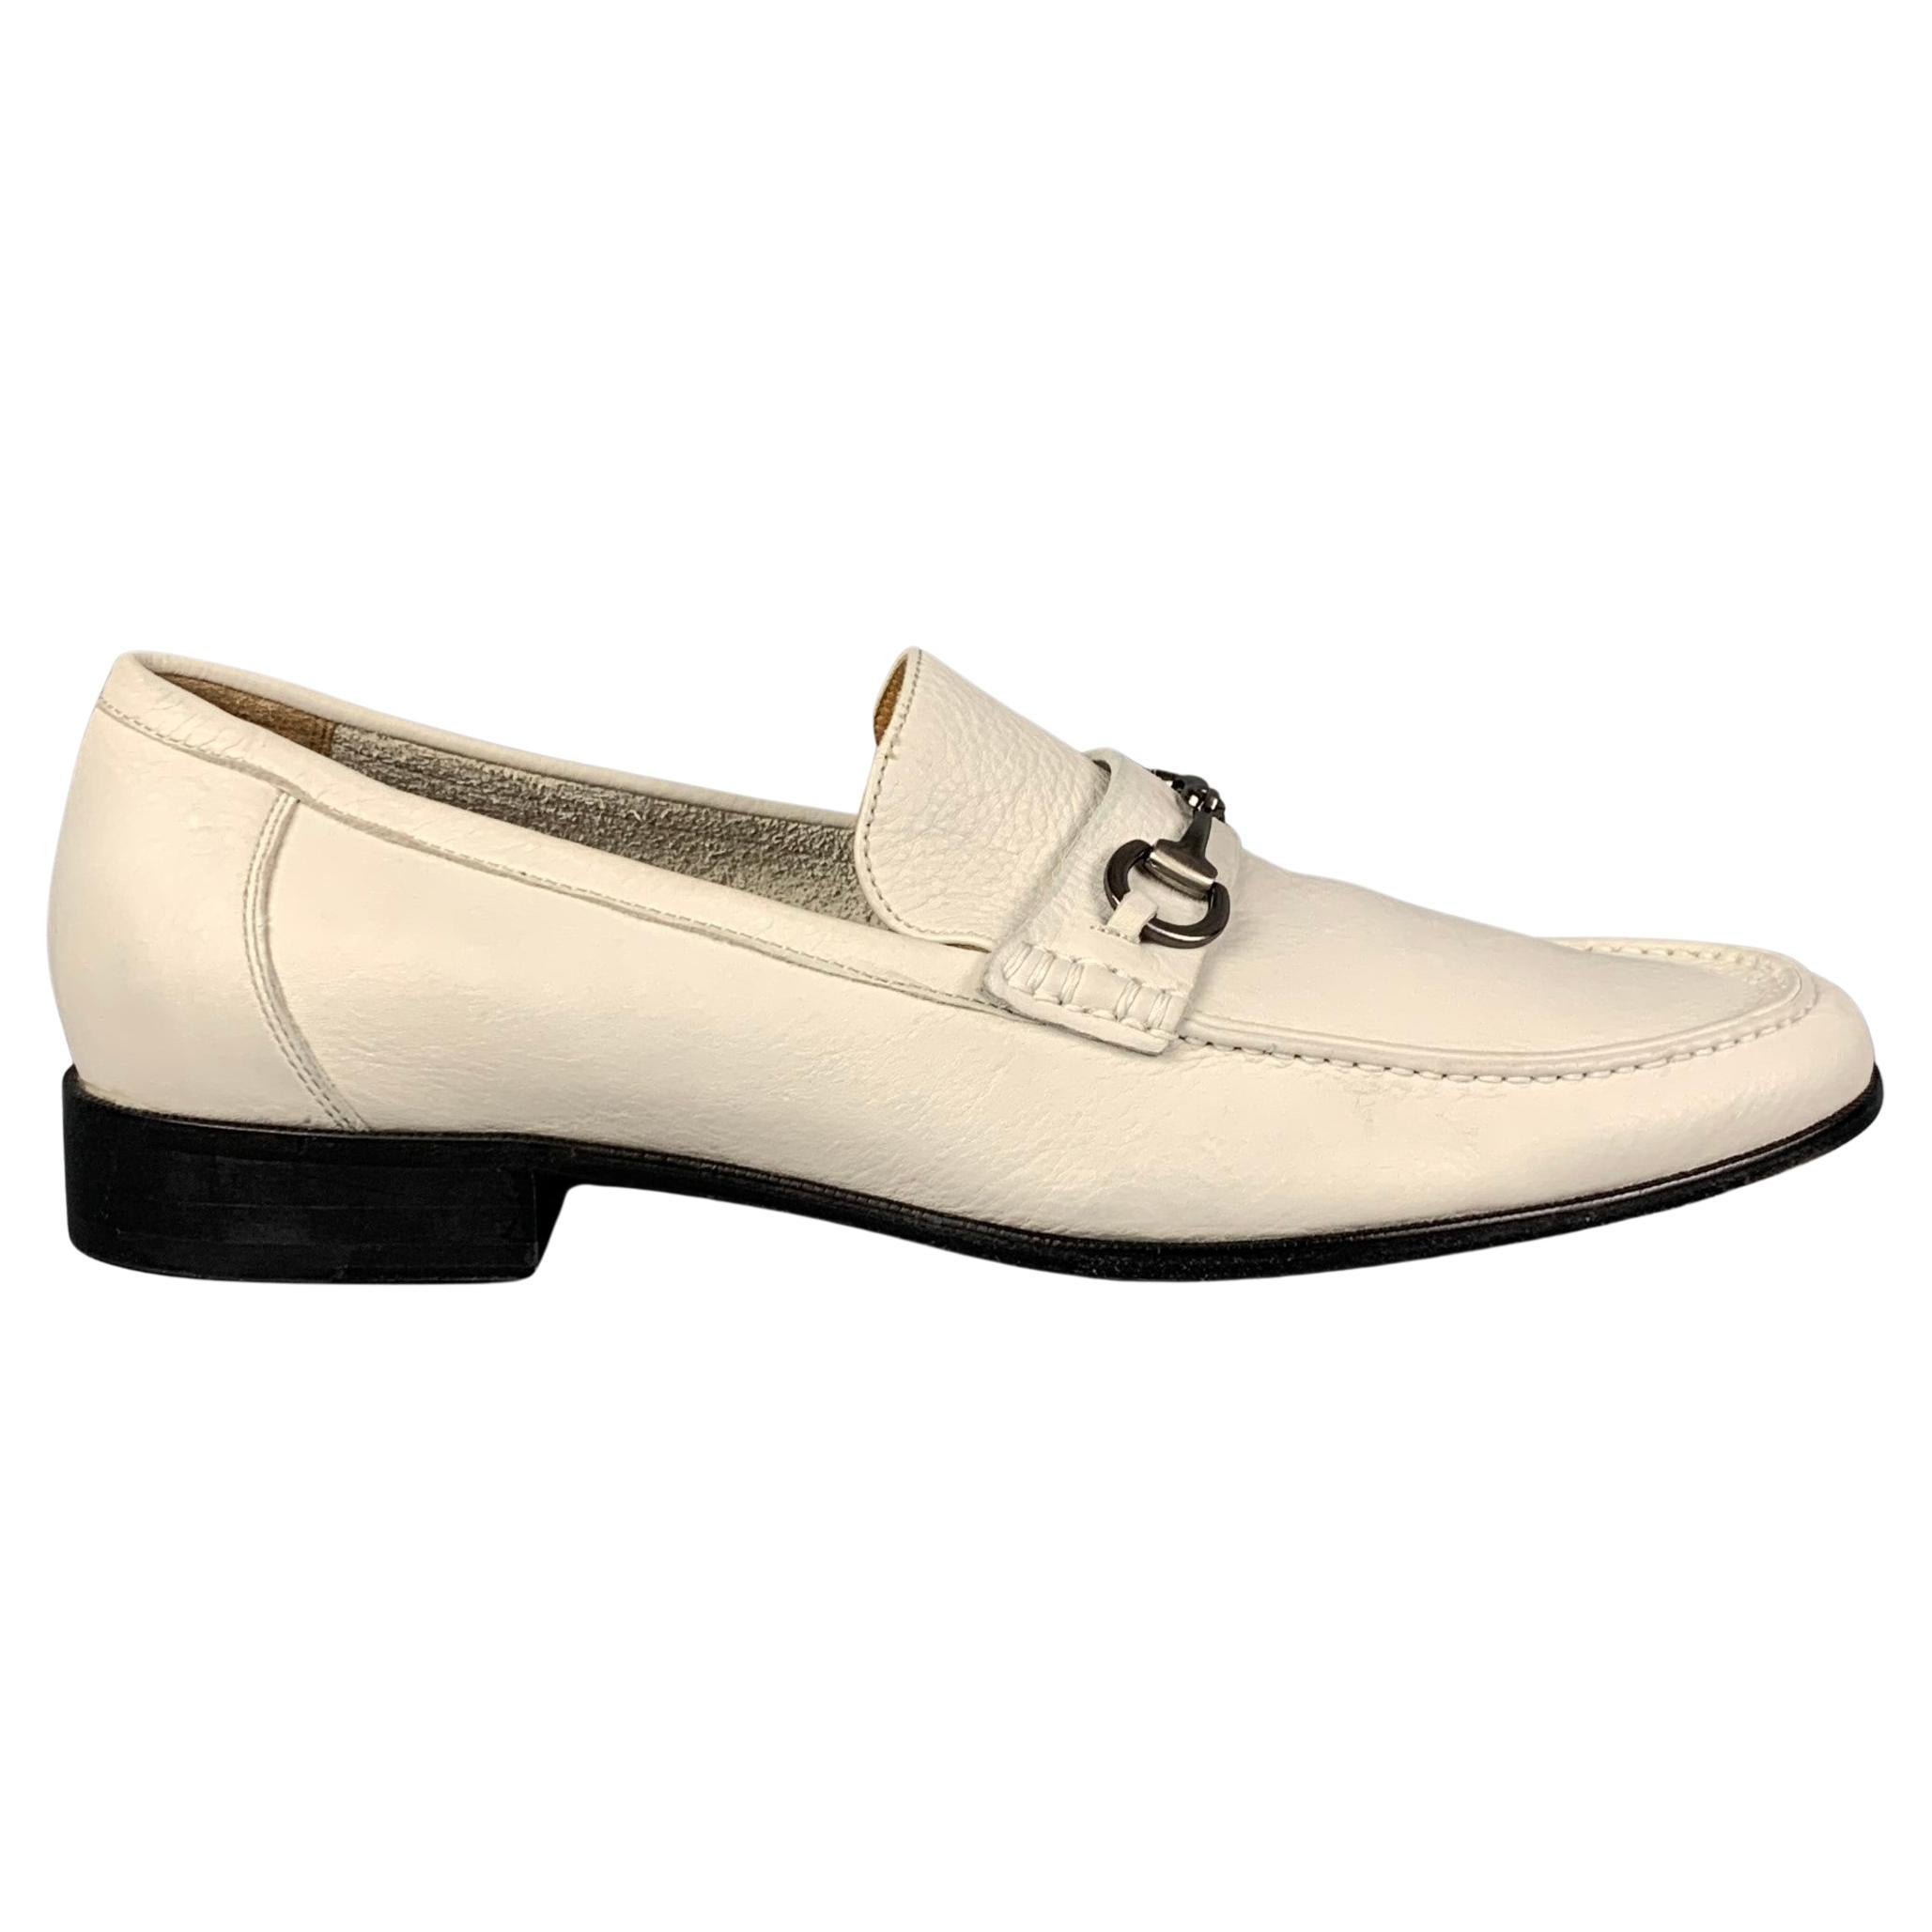 SAKS FIFTH AVENUE Size 11 White Leather Horse Bit Slip On Loafers